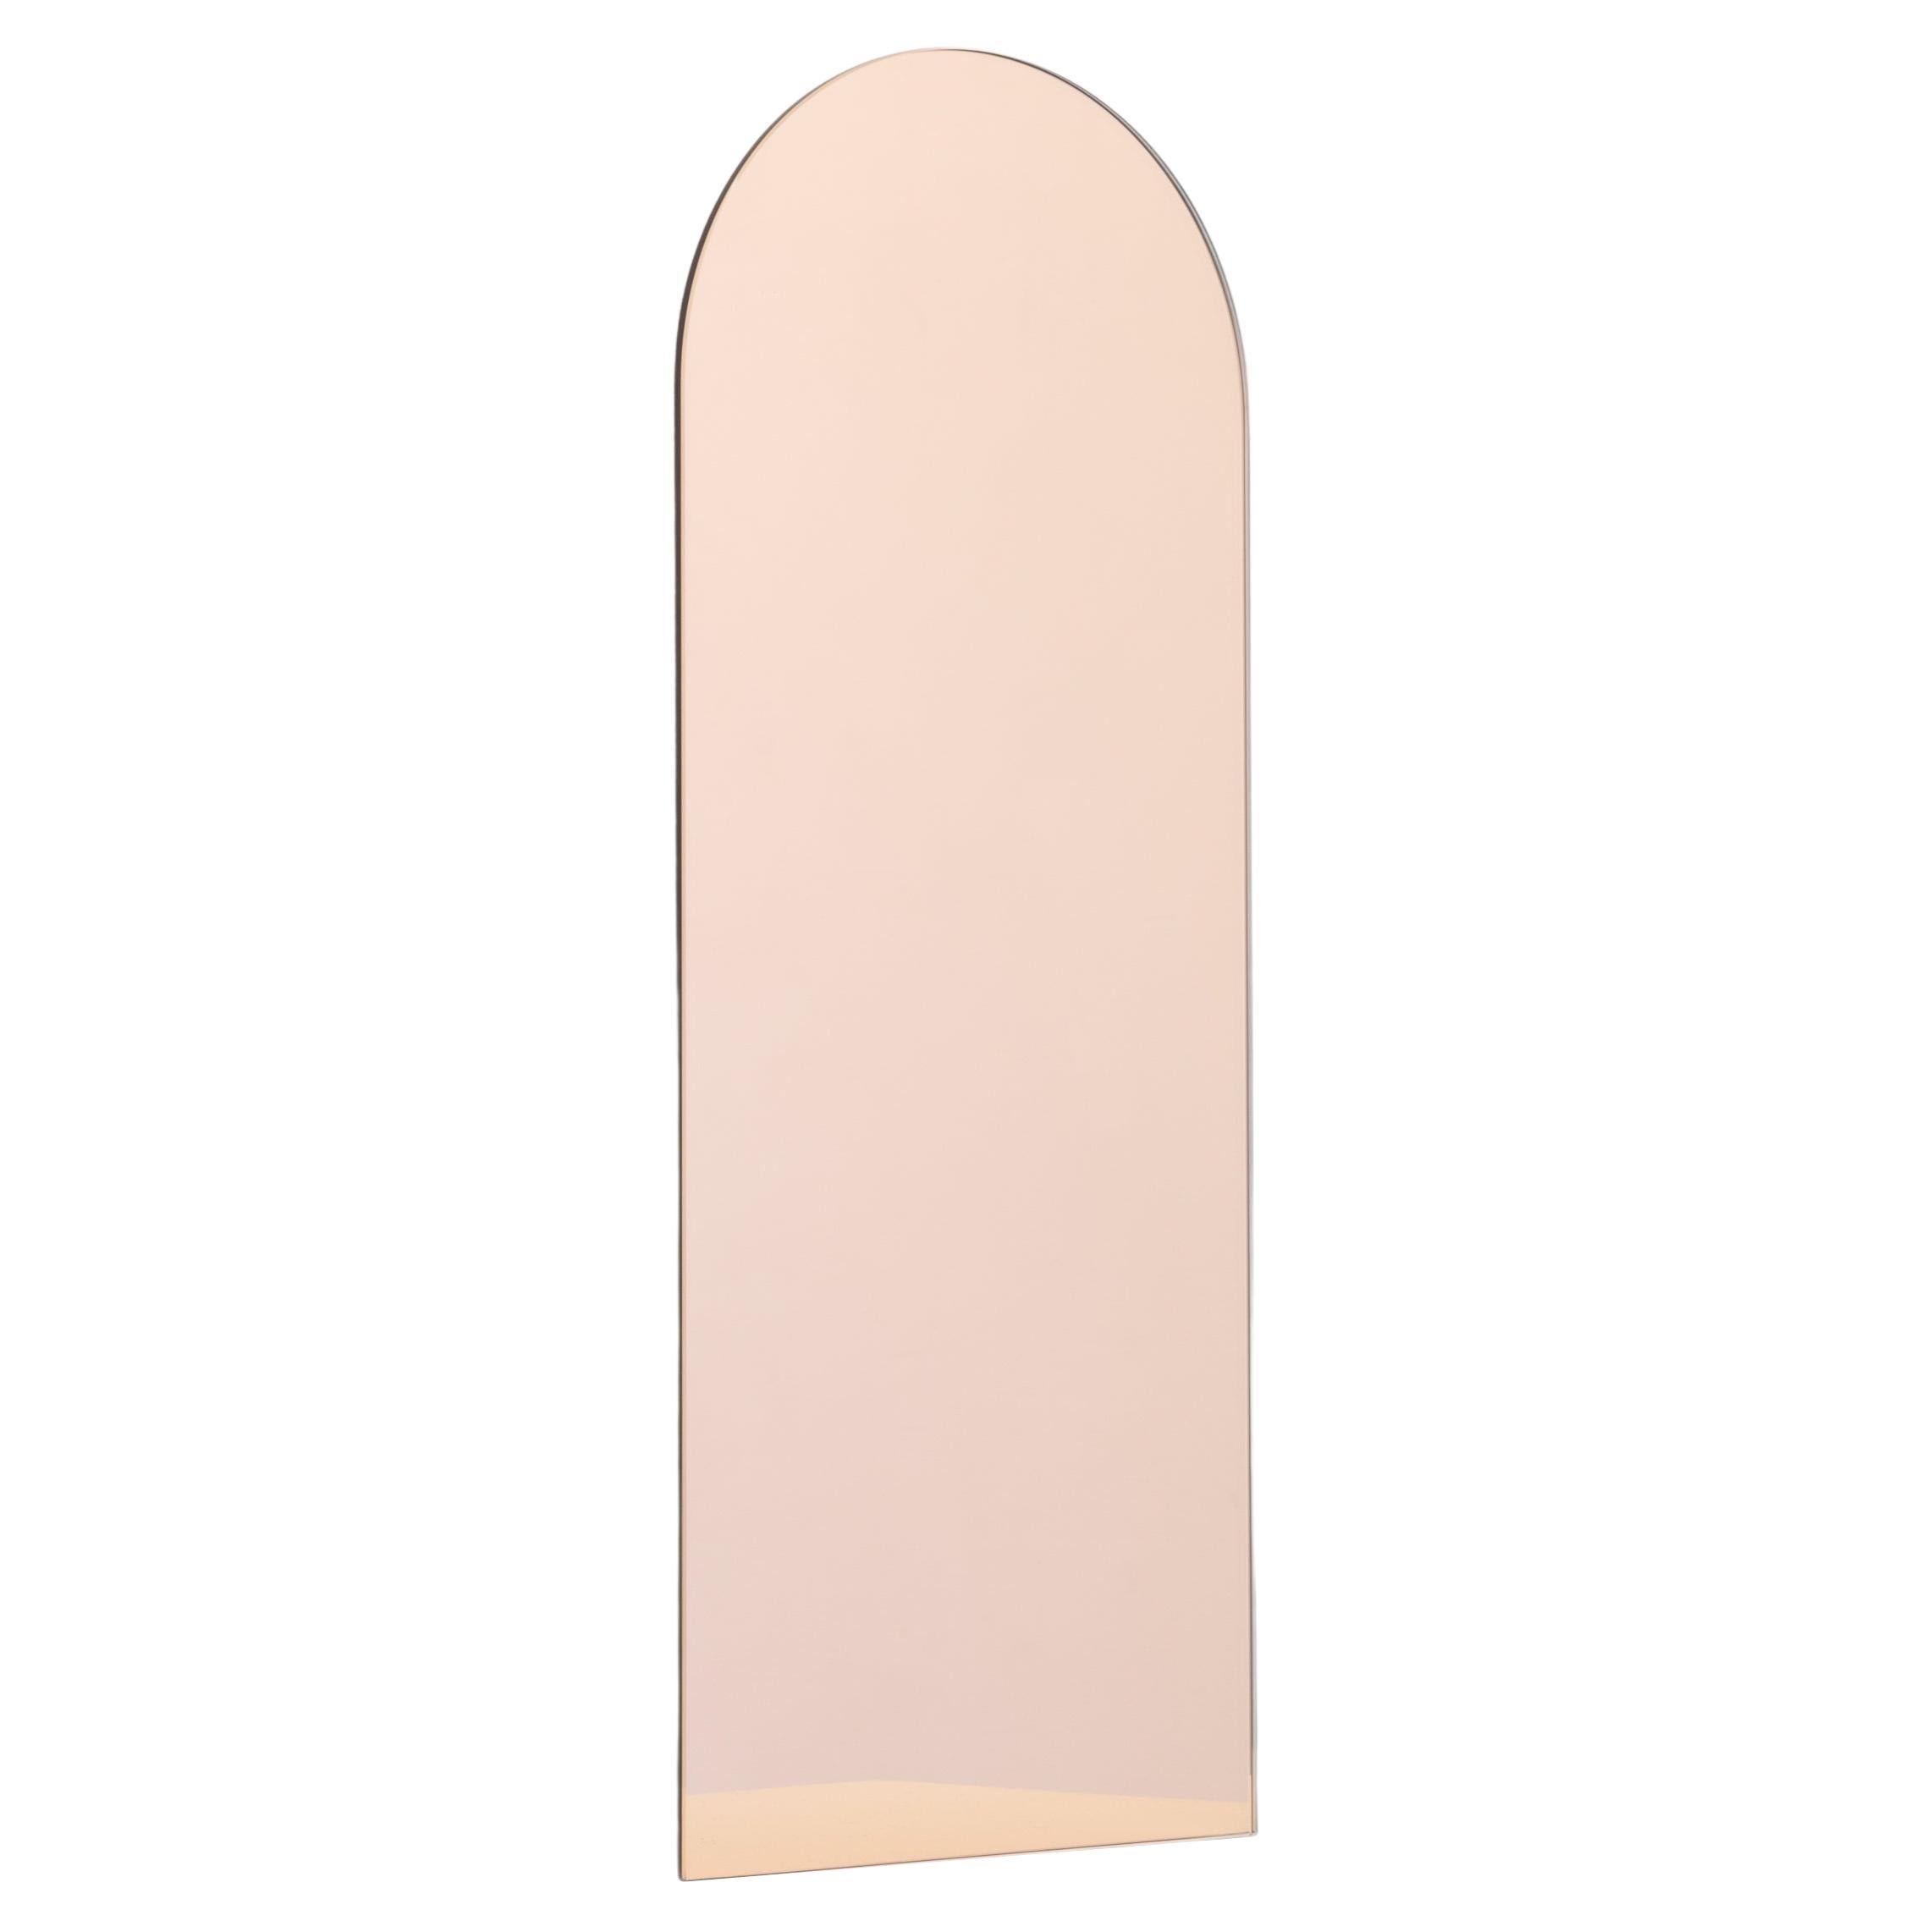 In Stock Arcus Rose Gold Arched Frameless Minimalist Customisable Mirror, Small